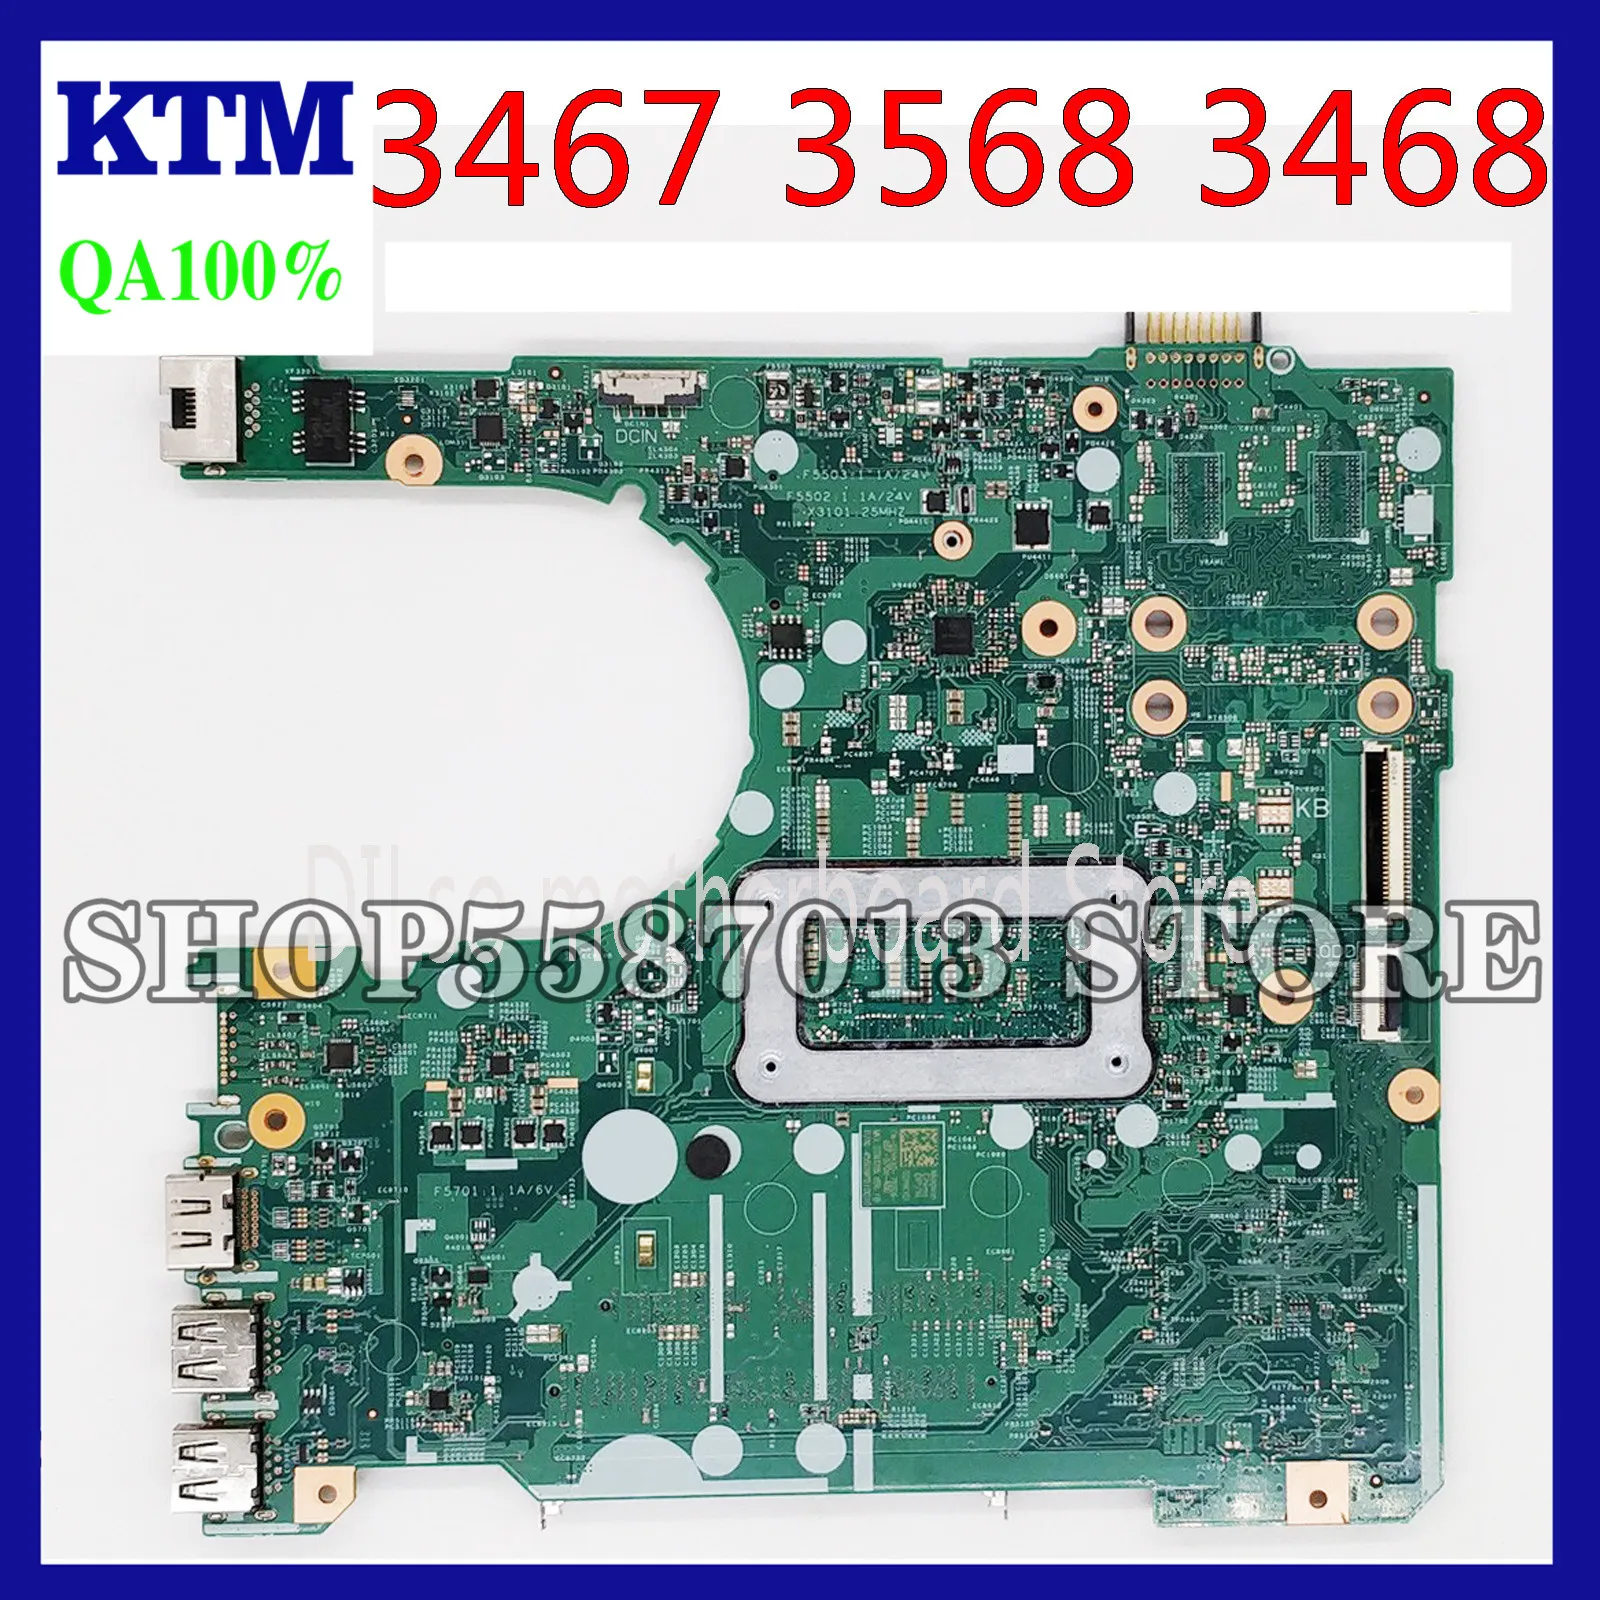 

KEFU CN-0NP4RY 0NP4RY Mainboard For DELL Inspiron 15 3567 3467 3568 3468 Laptop Motherboard I3-6006U 15341-1 work 100%